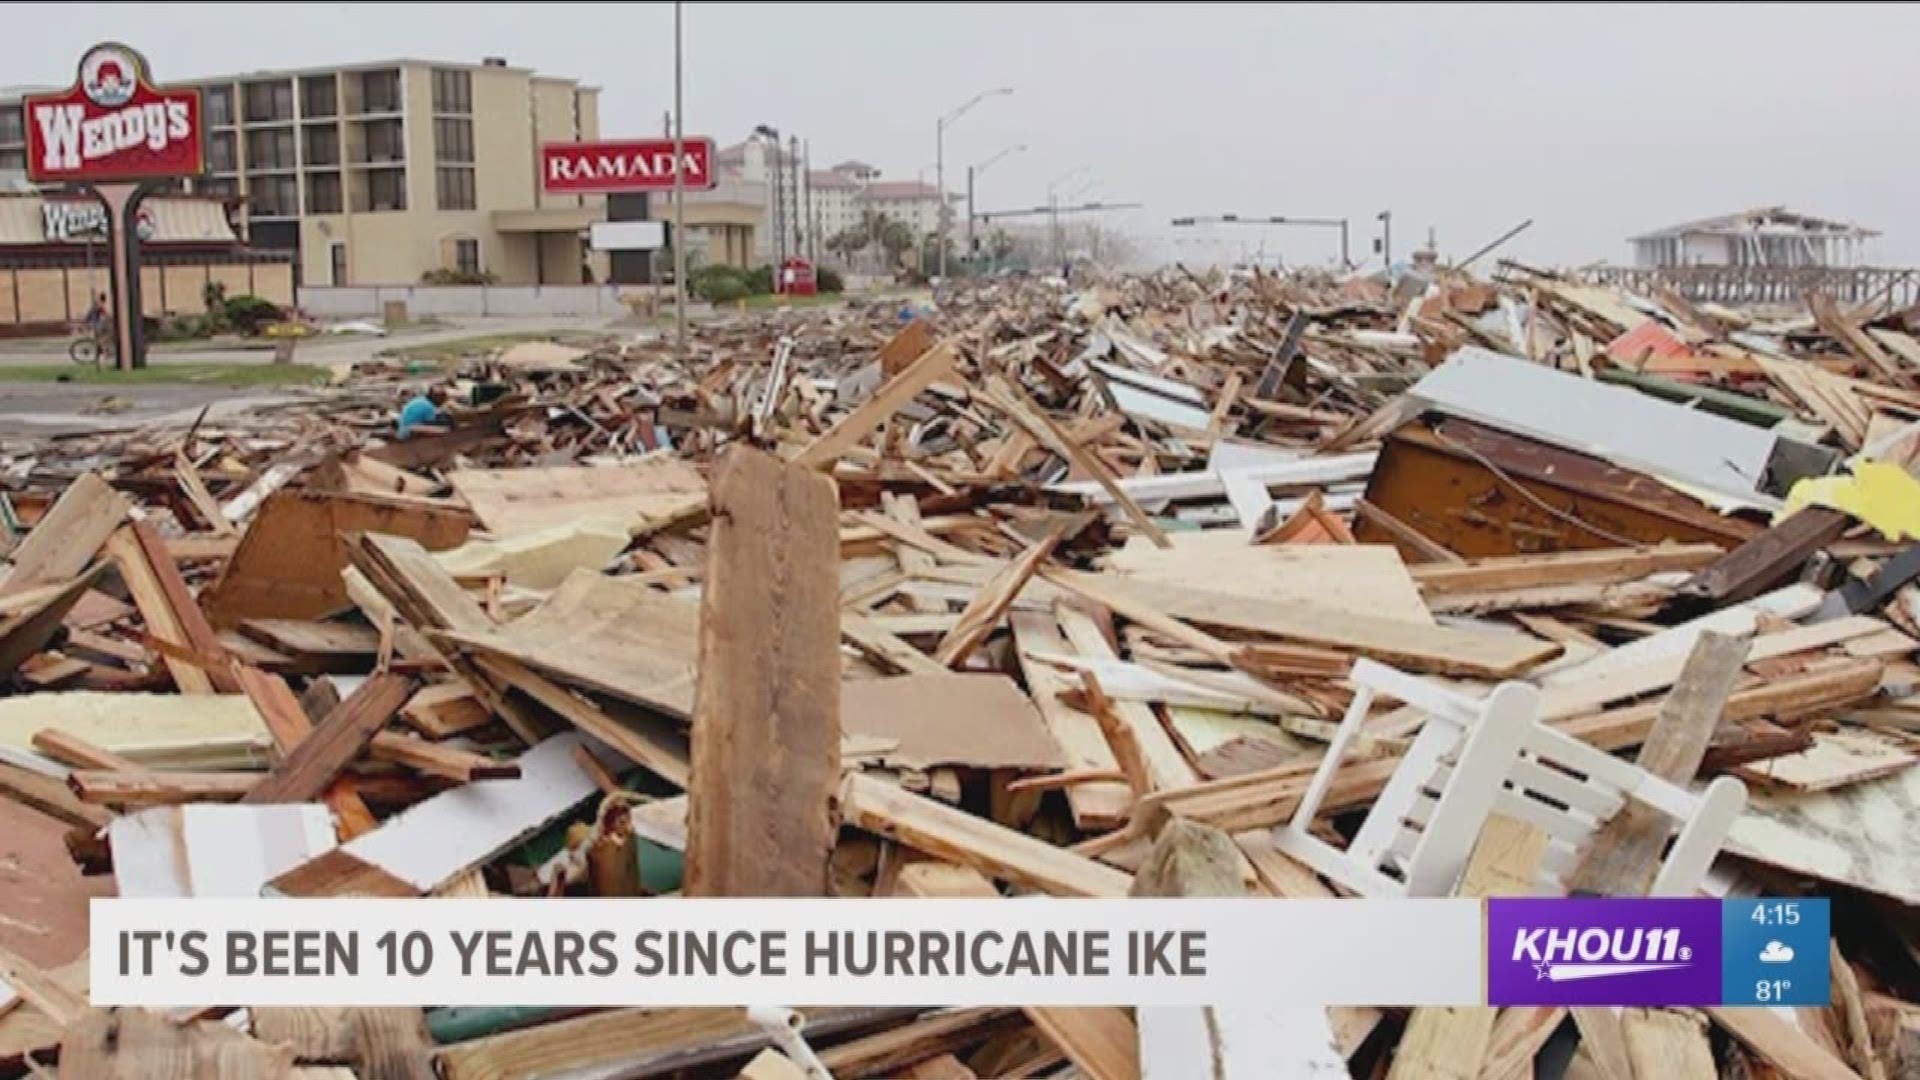 The Bolivar Peninsula was, in many ways, ground zero for Hurricane Ike back in 2008. KHOU 11 reporter Jason Miles is on the Peninsula, looking back at the storm's devastation.